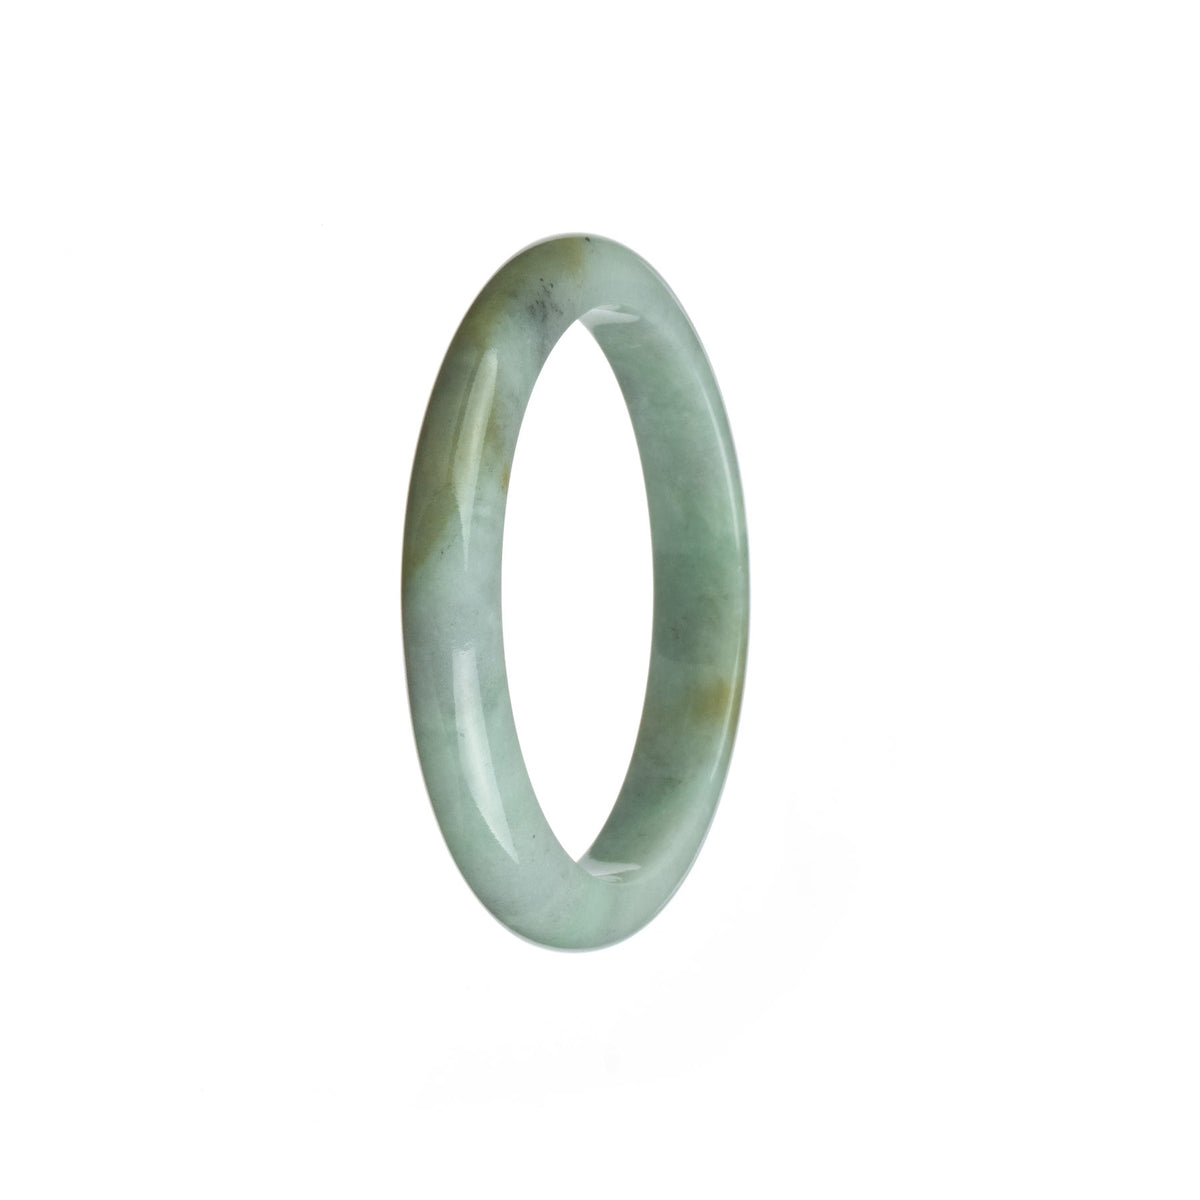 A close-up photo of a semi-round, genuine untreated white and light brown jade bangle with a diameter of 53mm. The bangle has a smooth and polished surface, showcasing the natural beauty of the jade.